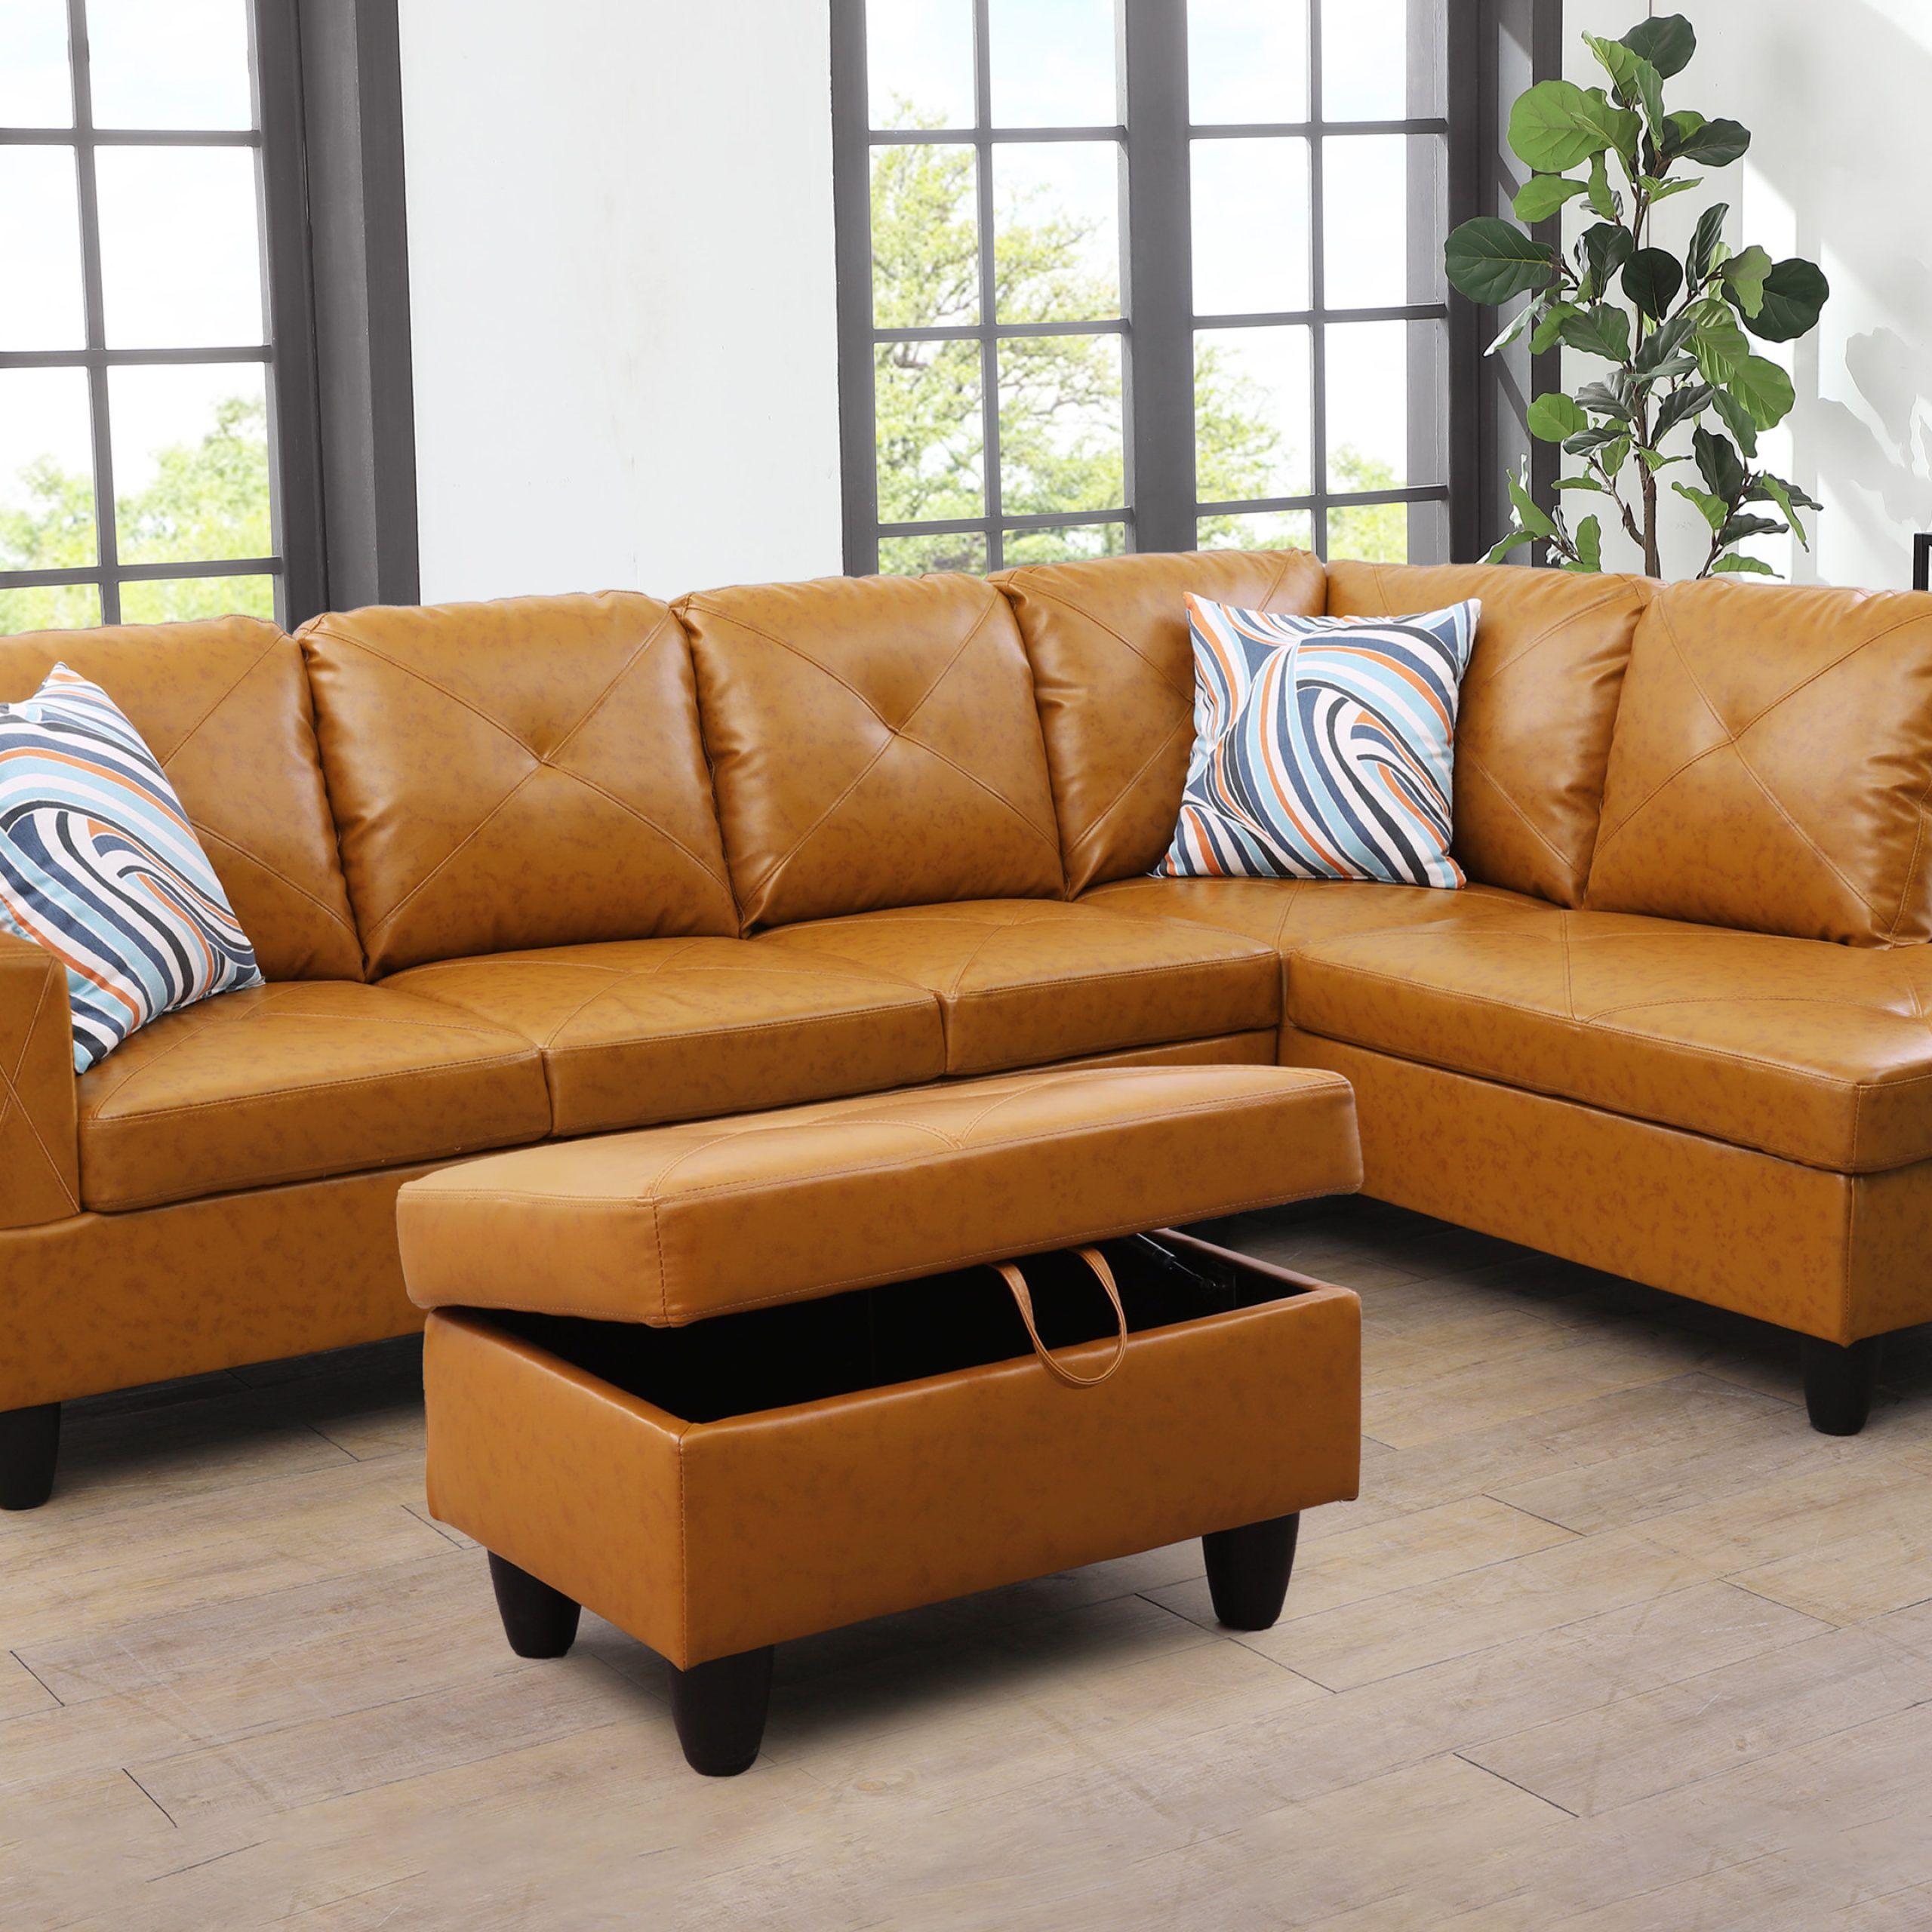 Ebern Designs 3 – Piece Vegan Leather Sectional & Reviews | Wayfair Intended For 3 Piece Leather Sectional Sofa Sets (View 6 of 15)